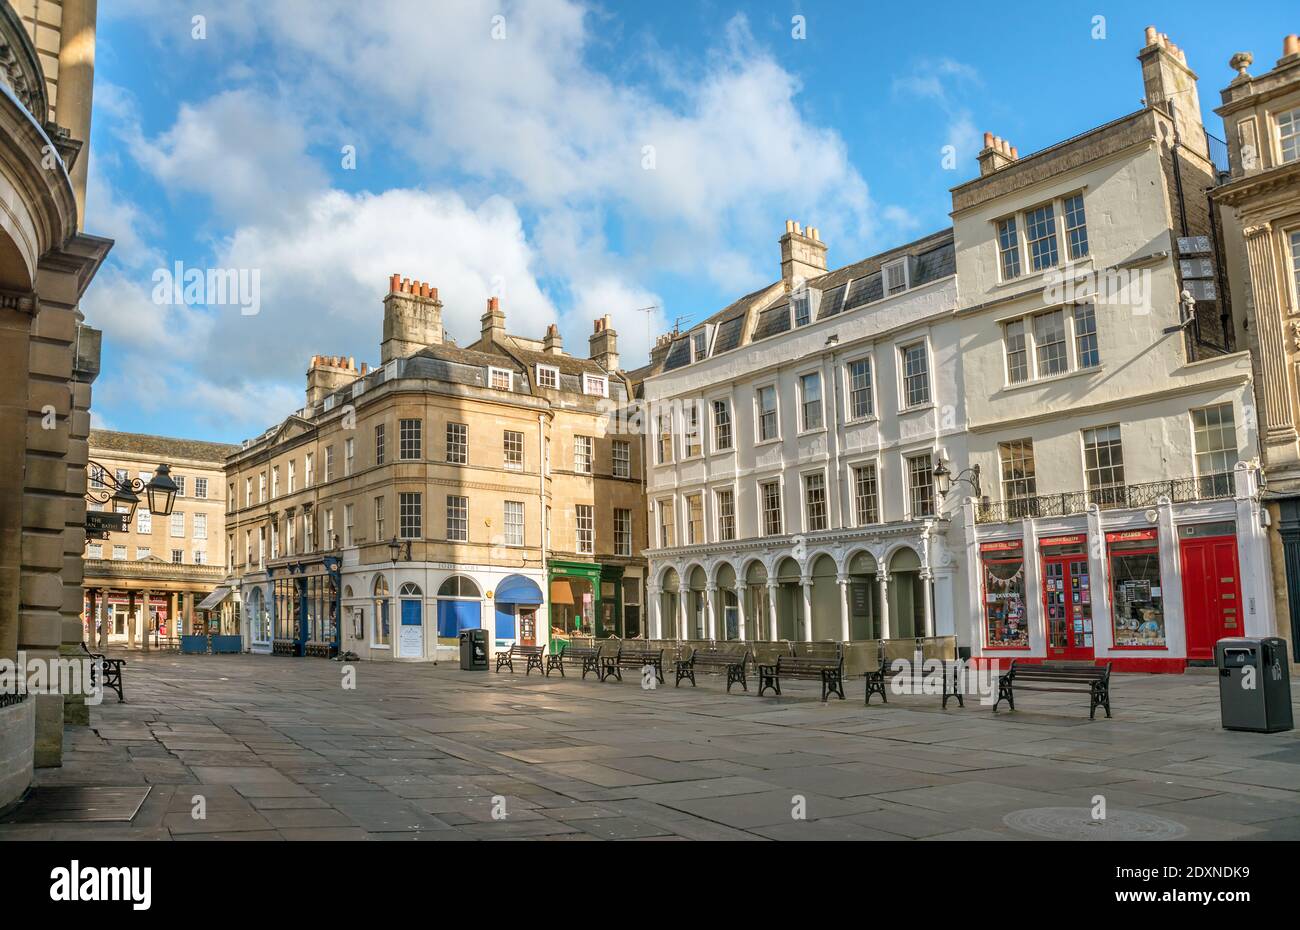 Abbey Church Yard in the historic city center of Bath, Somerset, England Stock Photo